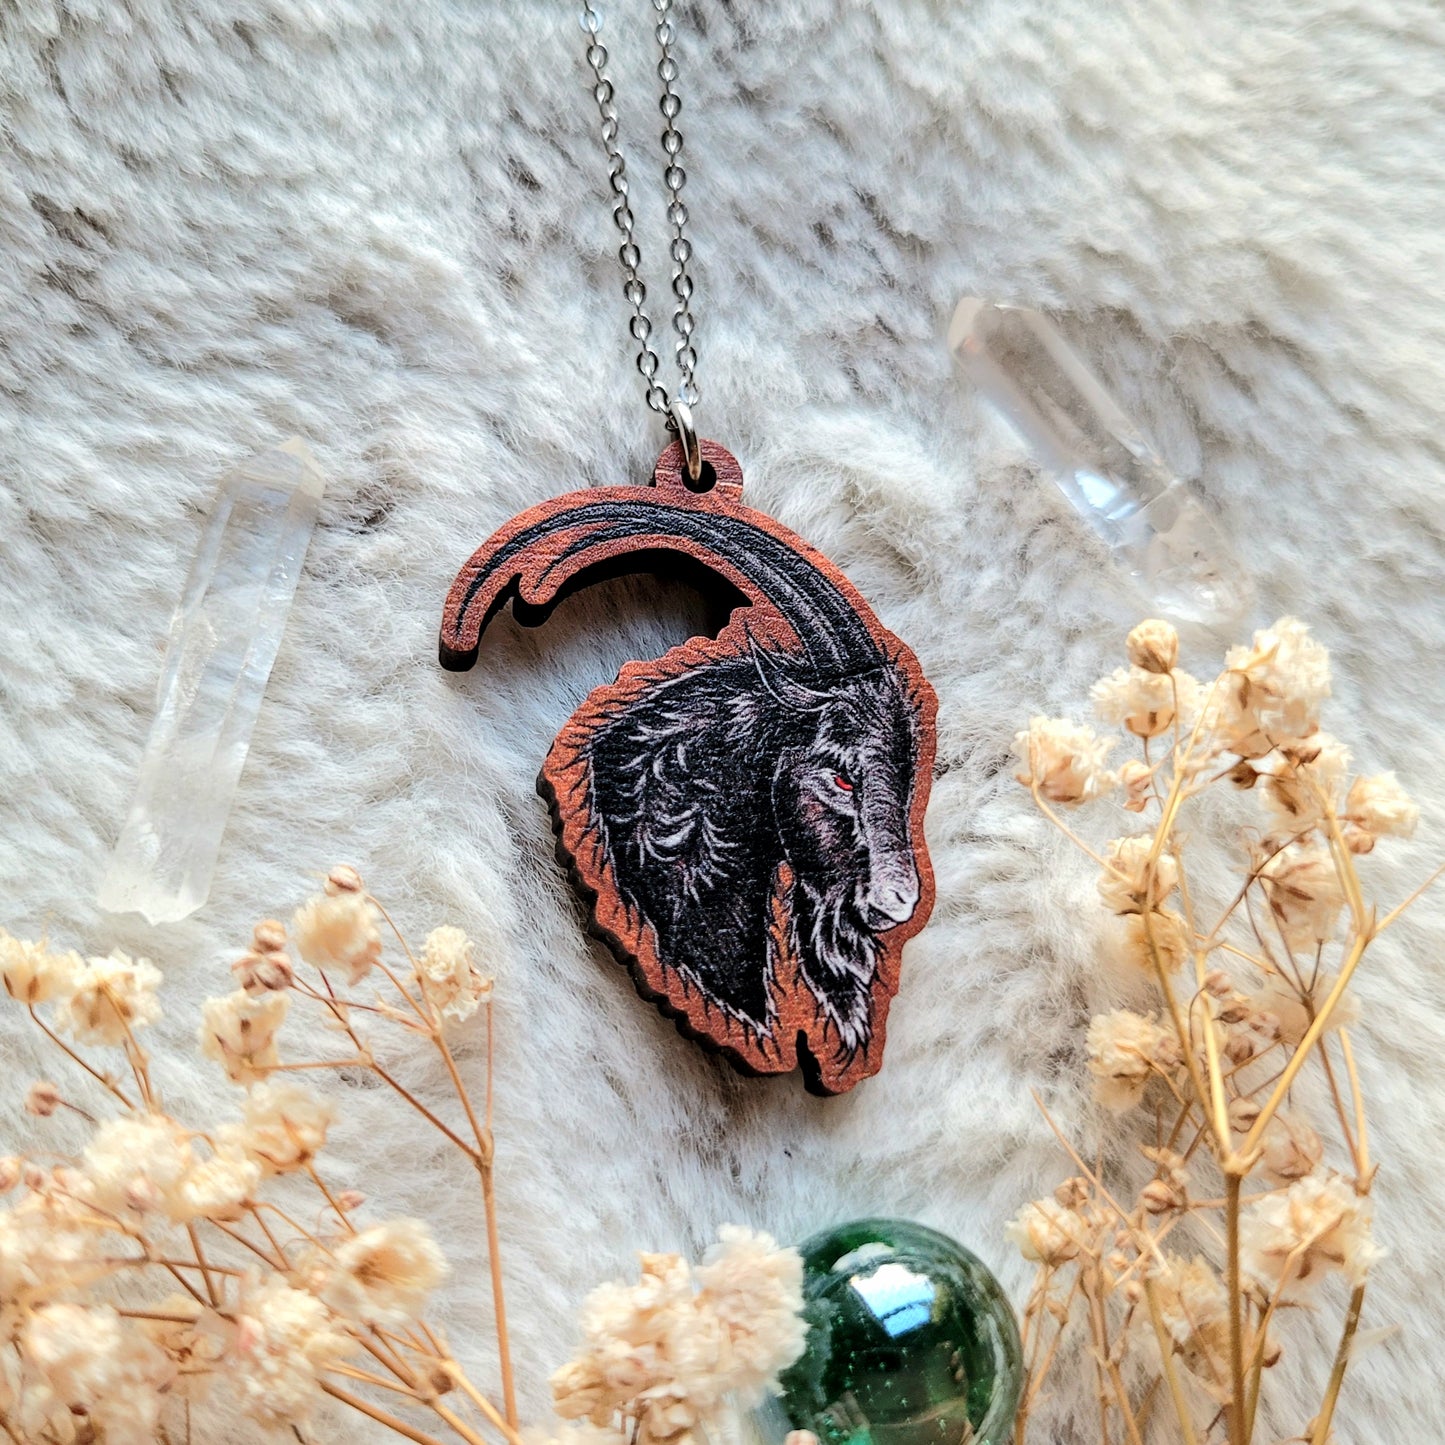 Black Phillip Goat illustrated necklace, responsibly sourced cherry wood, chain options available, by Grace Moth